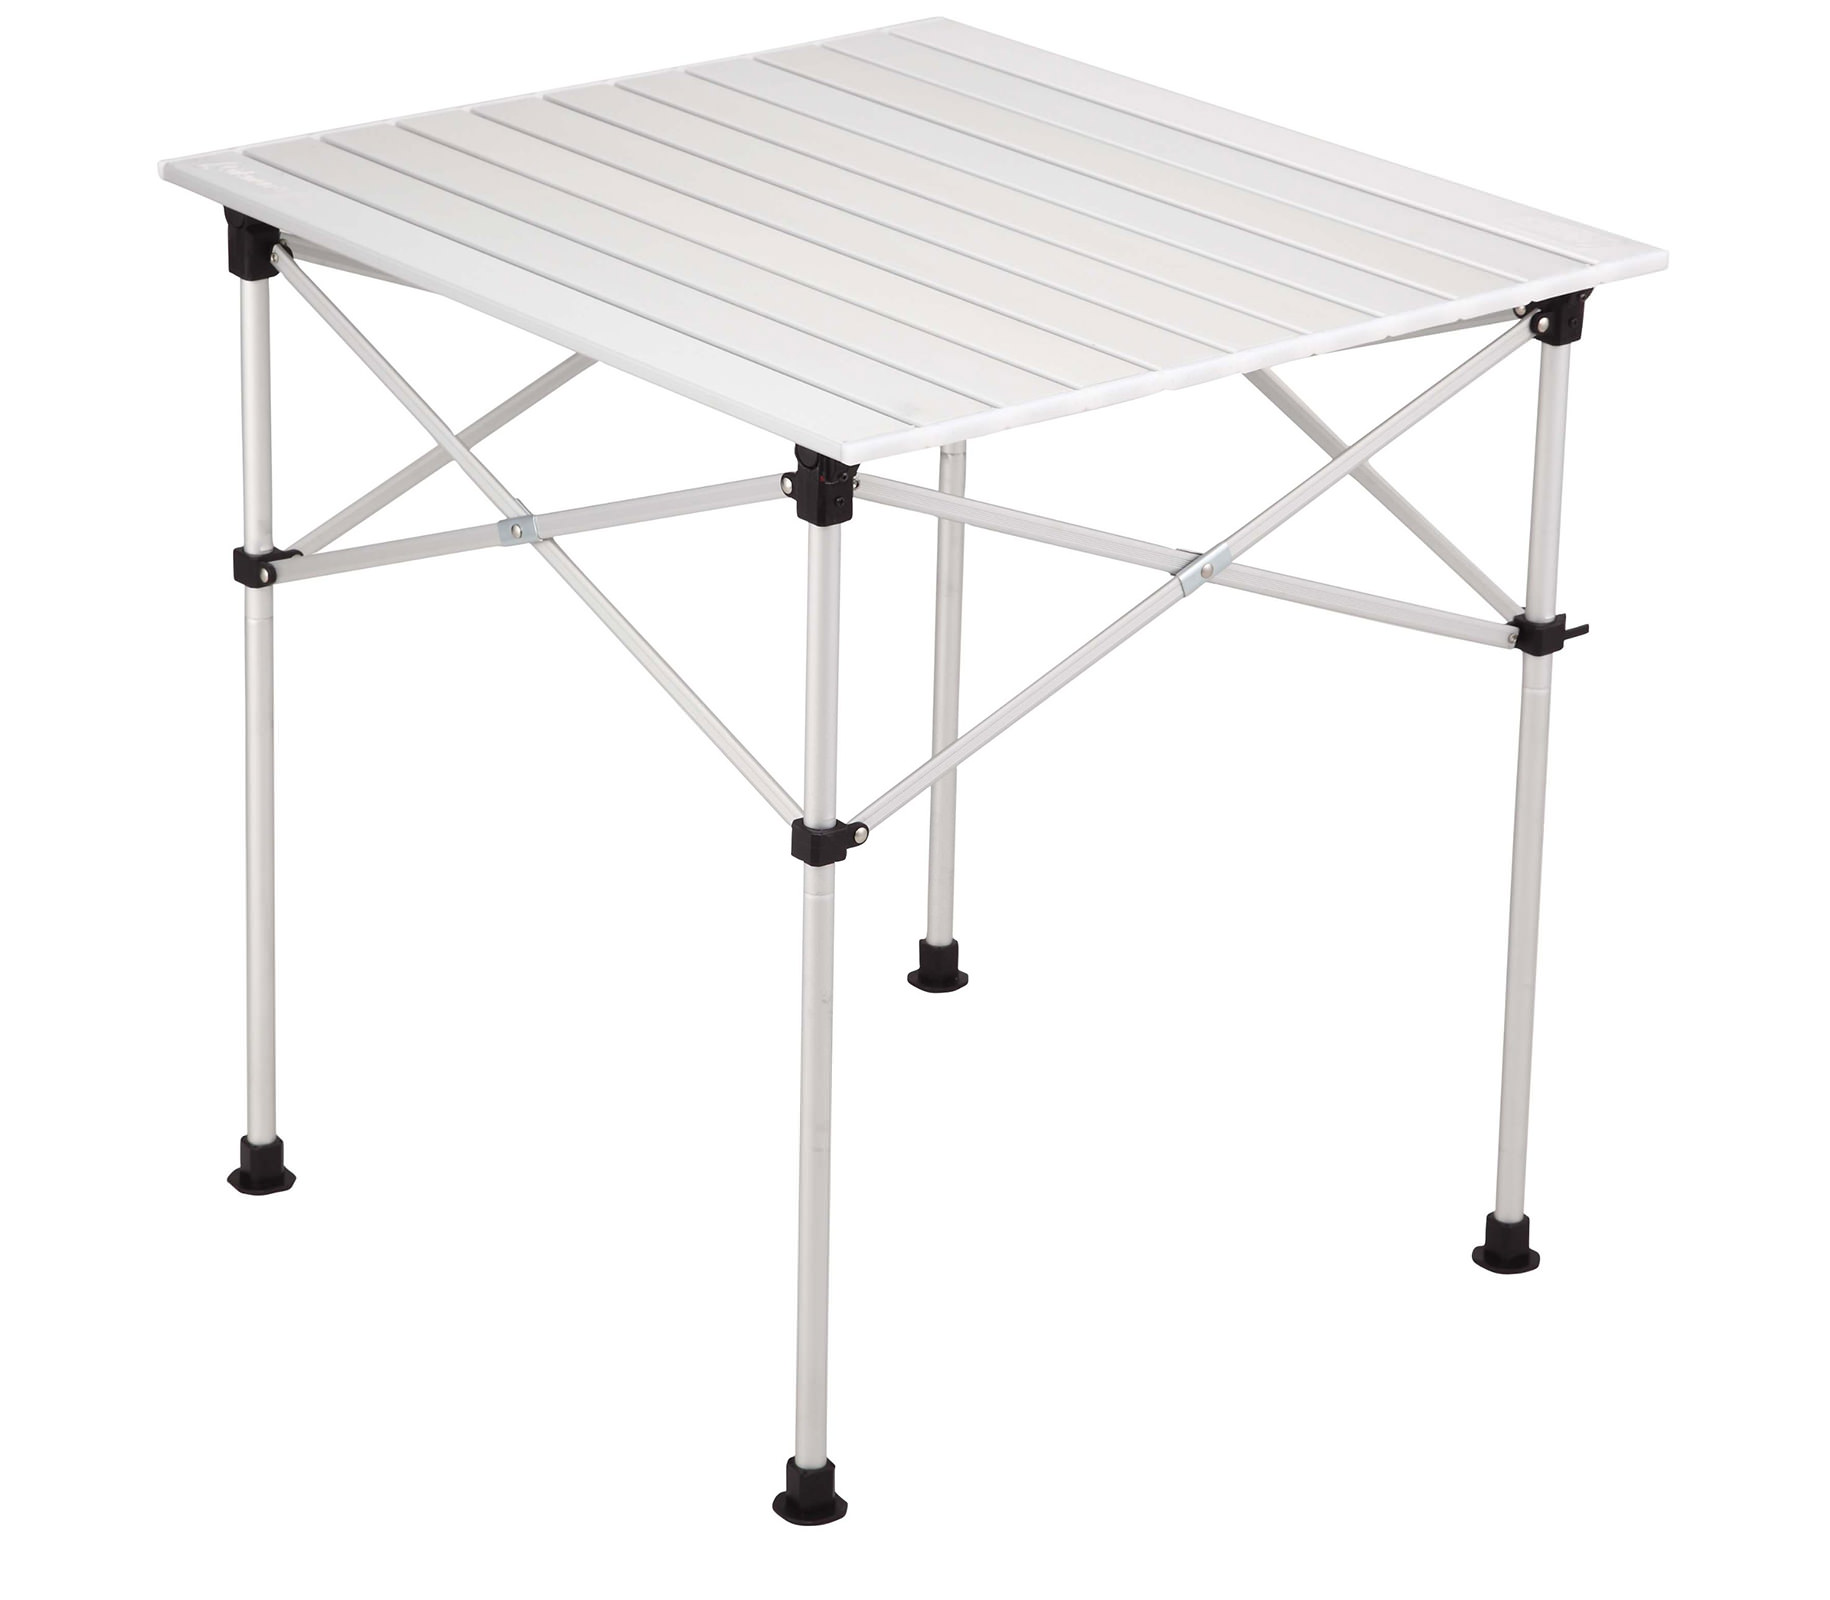 ban-xep-coleman-easy-roll-2-stage-table-65-170-7640-7461-wetrek_vn